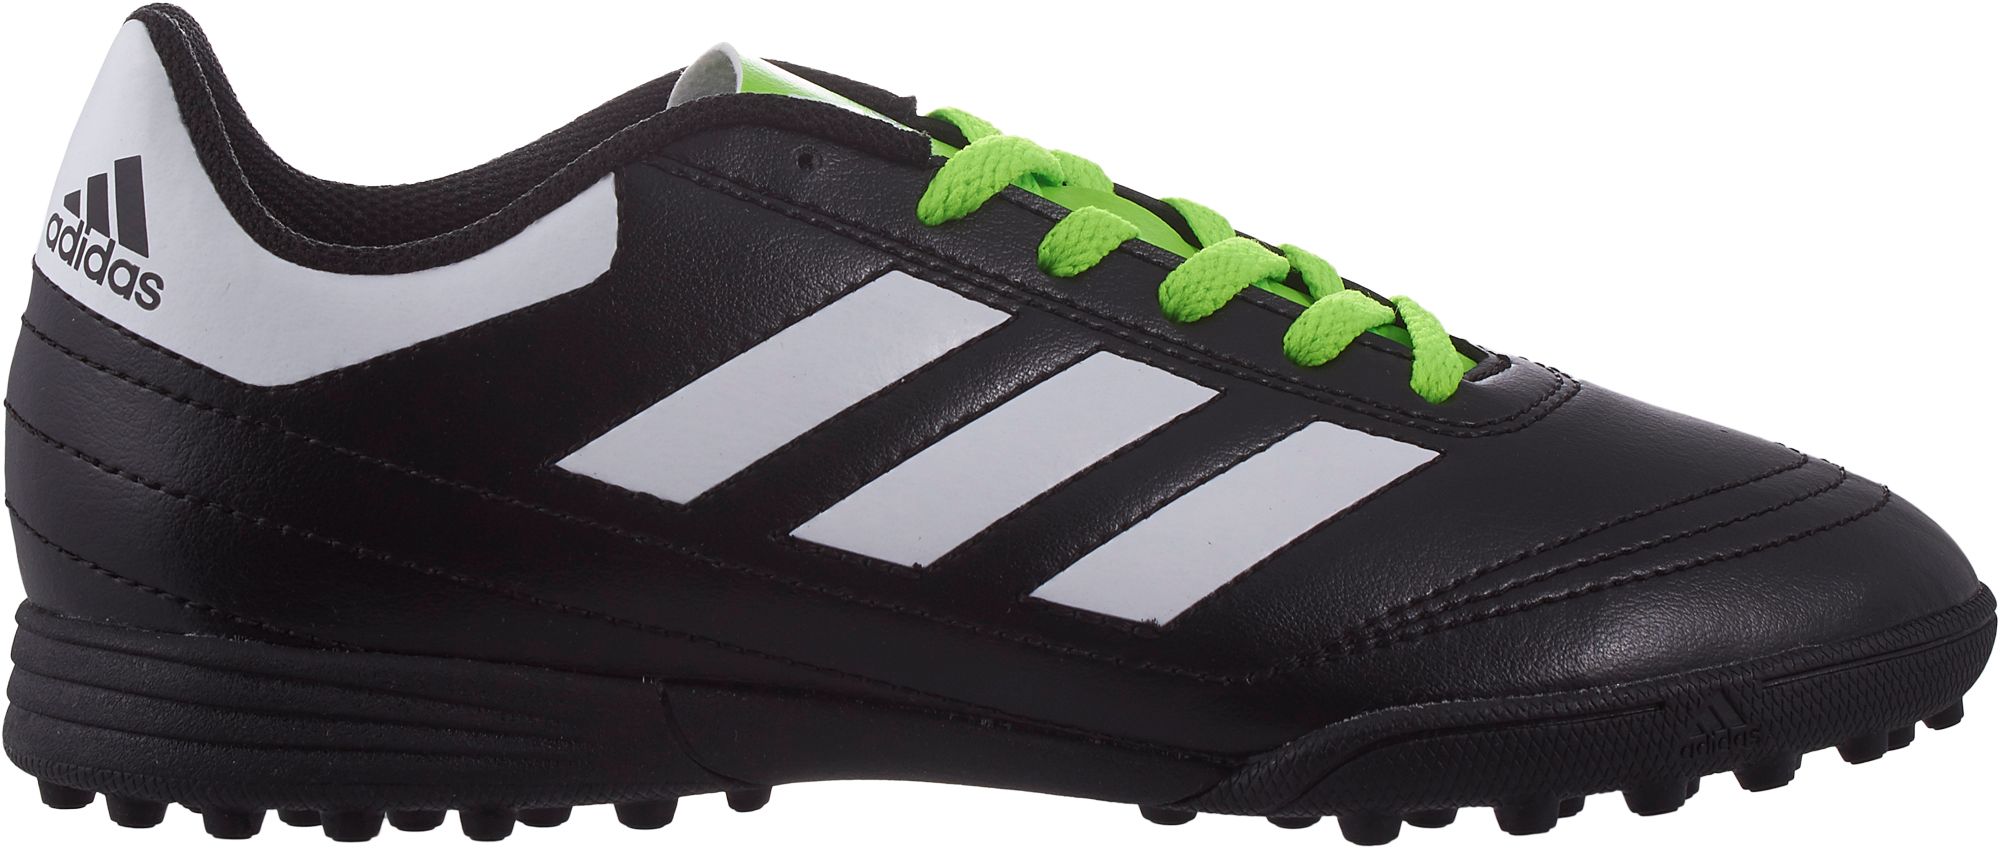 best adidas turf soccer shoes